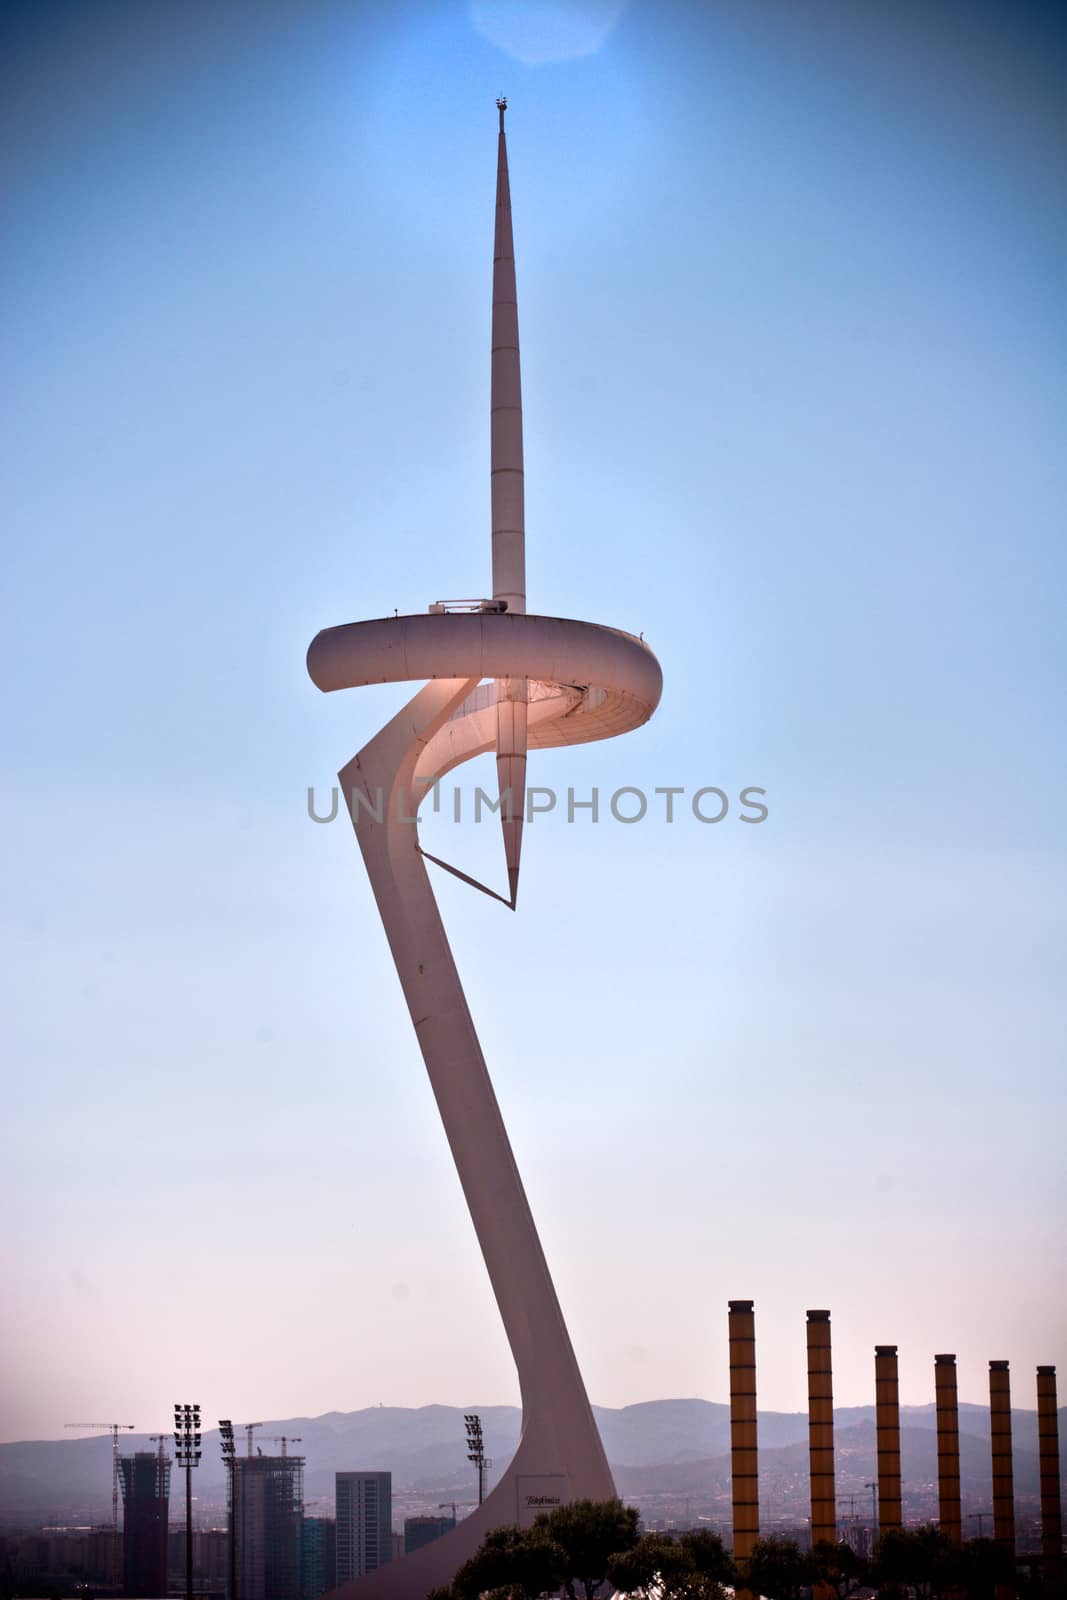 Montju��c Communications Tower, popularly known as Torre Calatrava and Torre Telef��nica in Barcelona, Spain